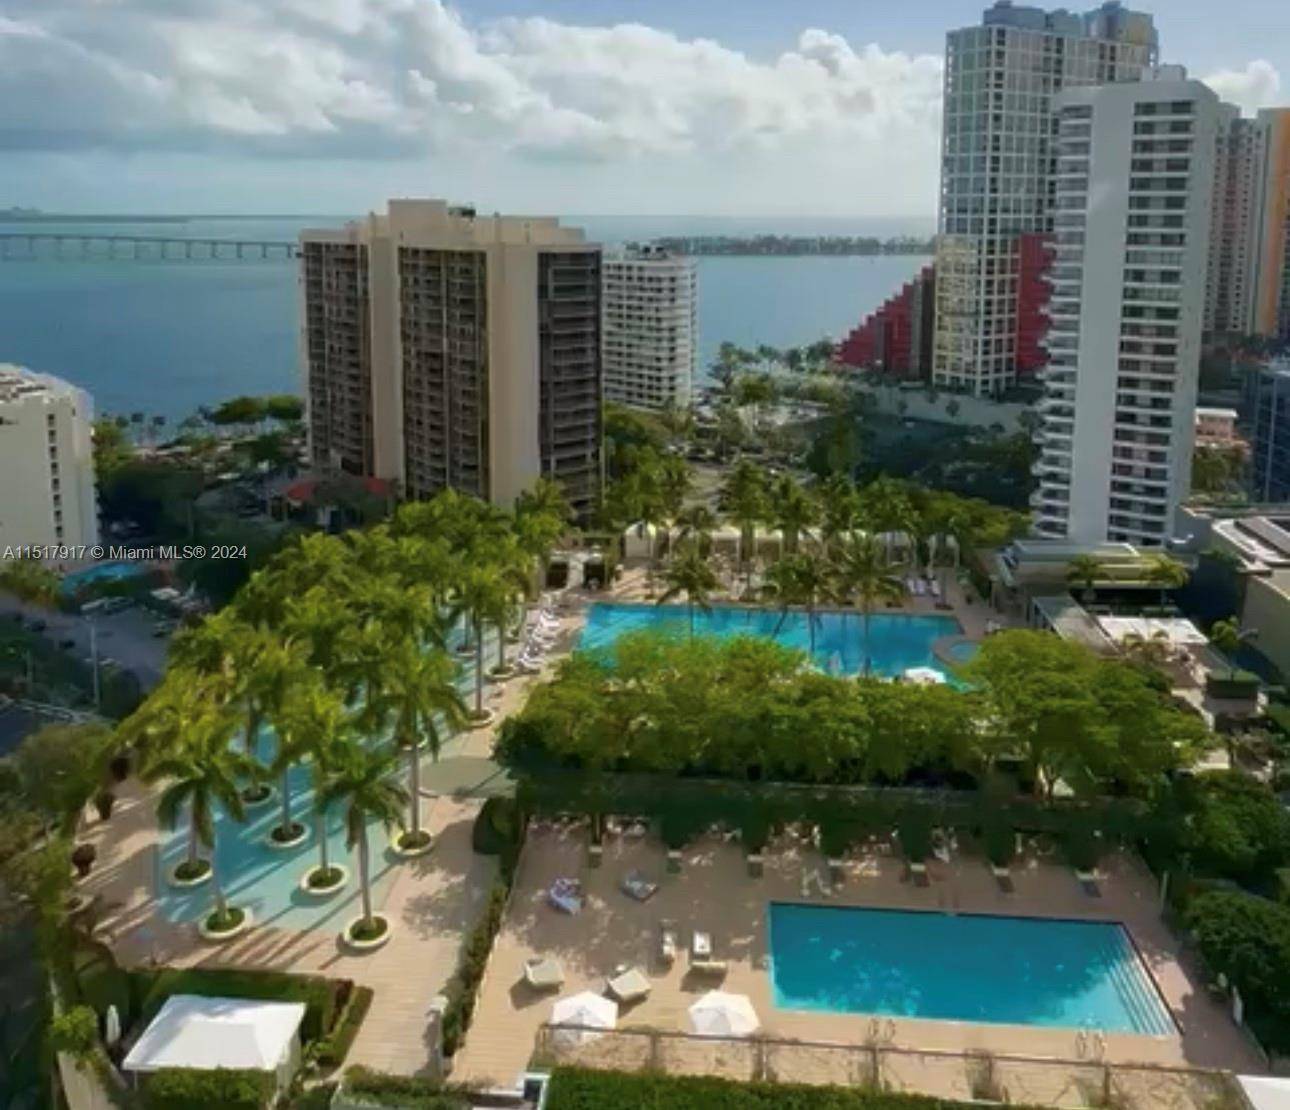 PERFECT FOR INVESTORS ! AMAZING 2 2 FULLY FURNISHED IN THE HEART OF BRICKELL'S FINANCIAL DISTRICT.